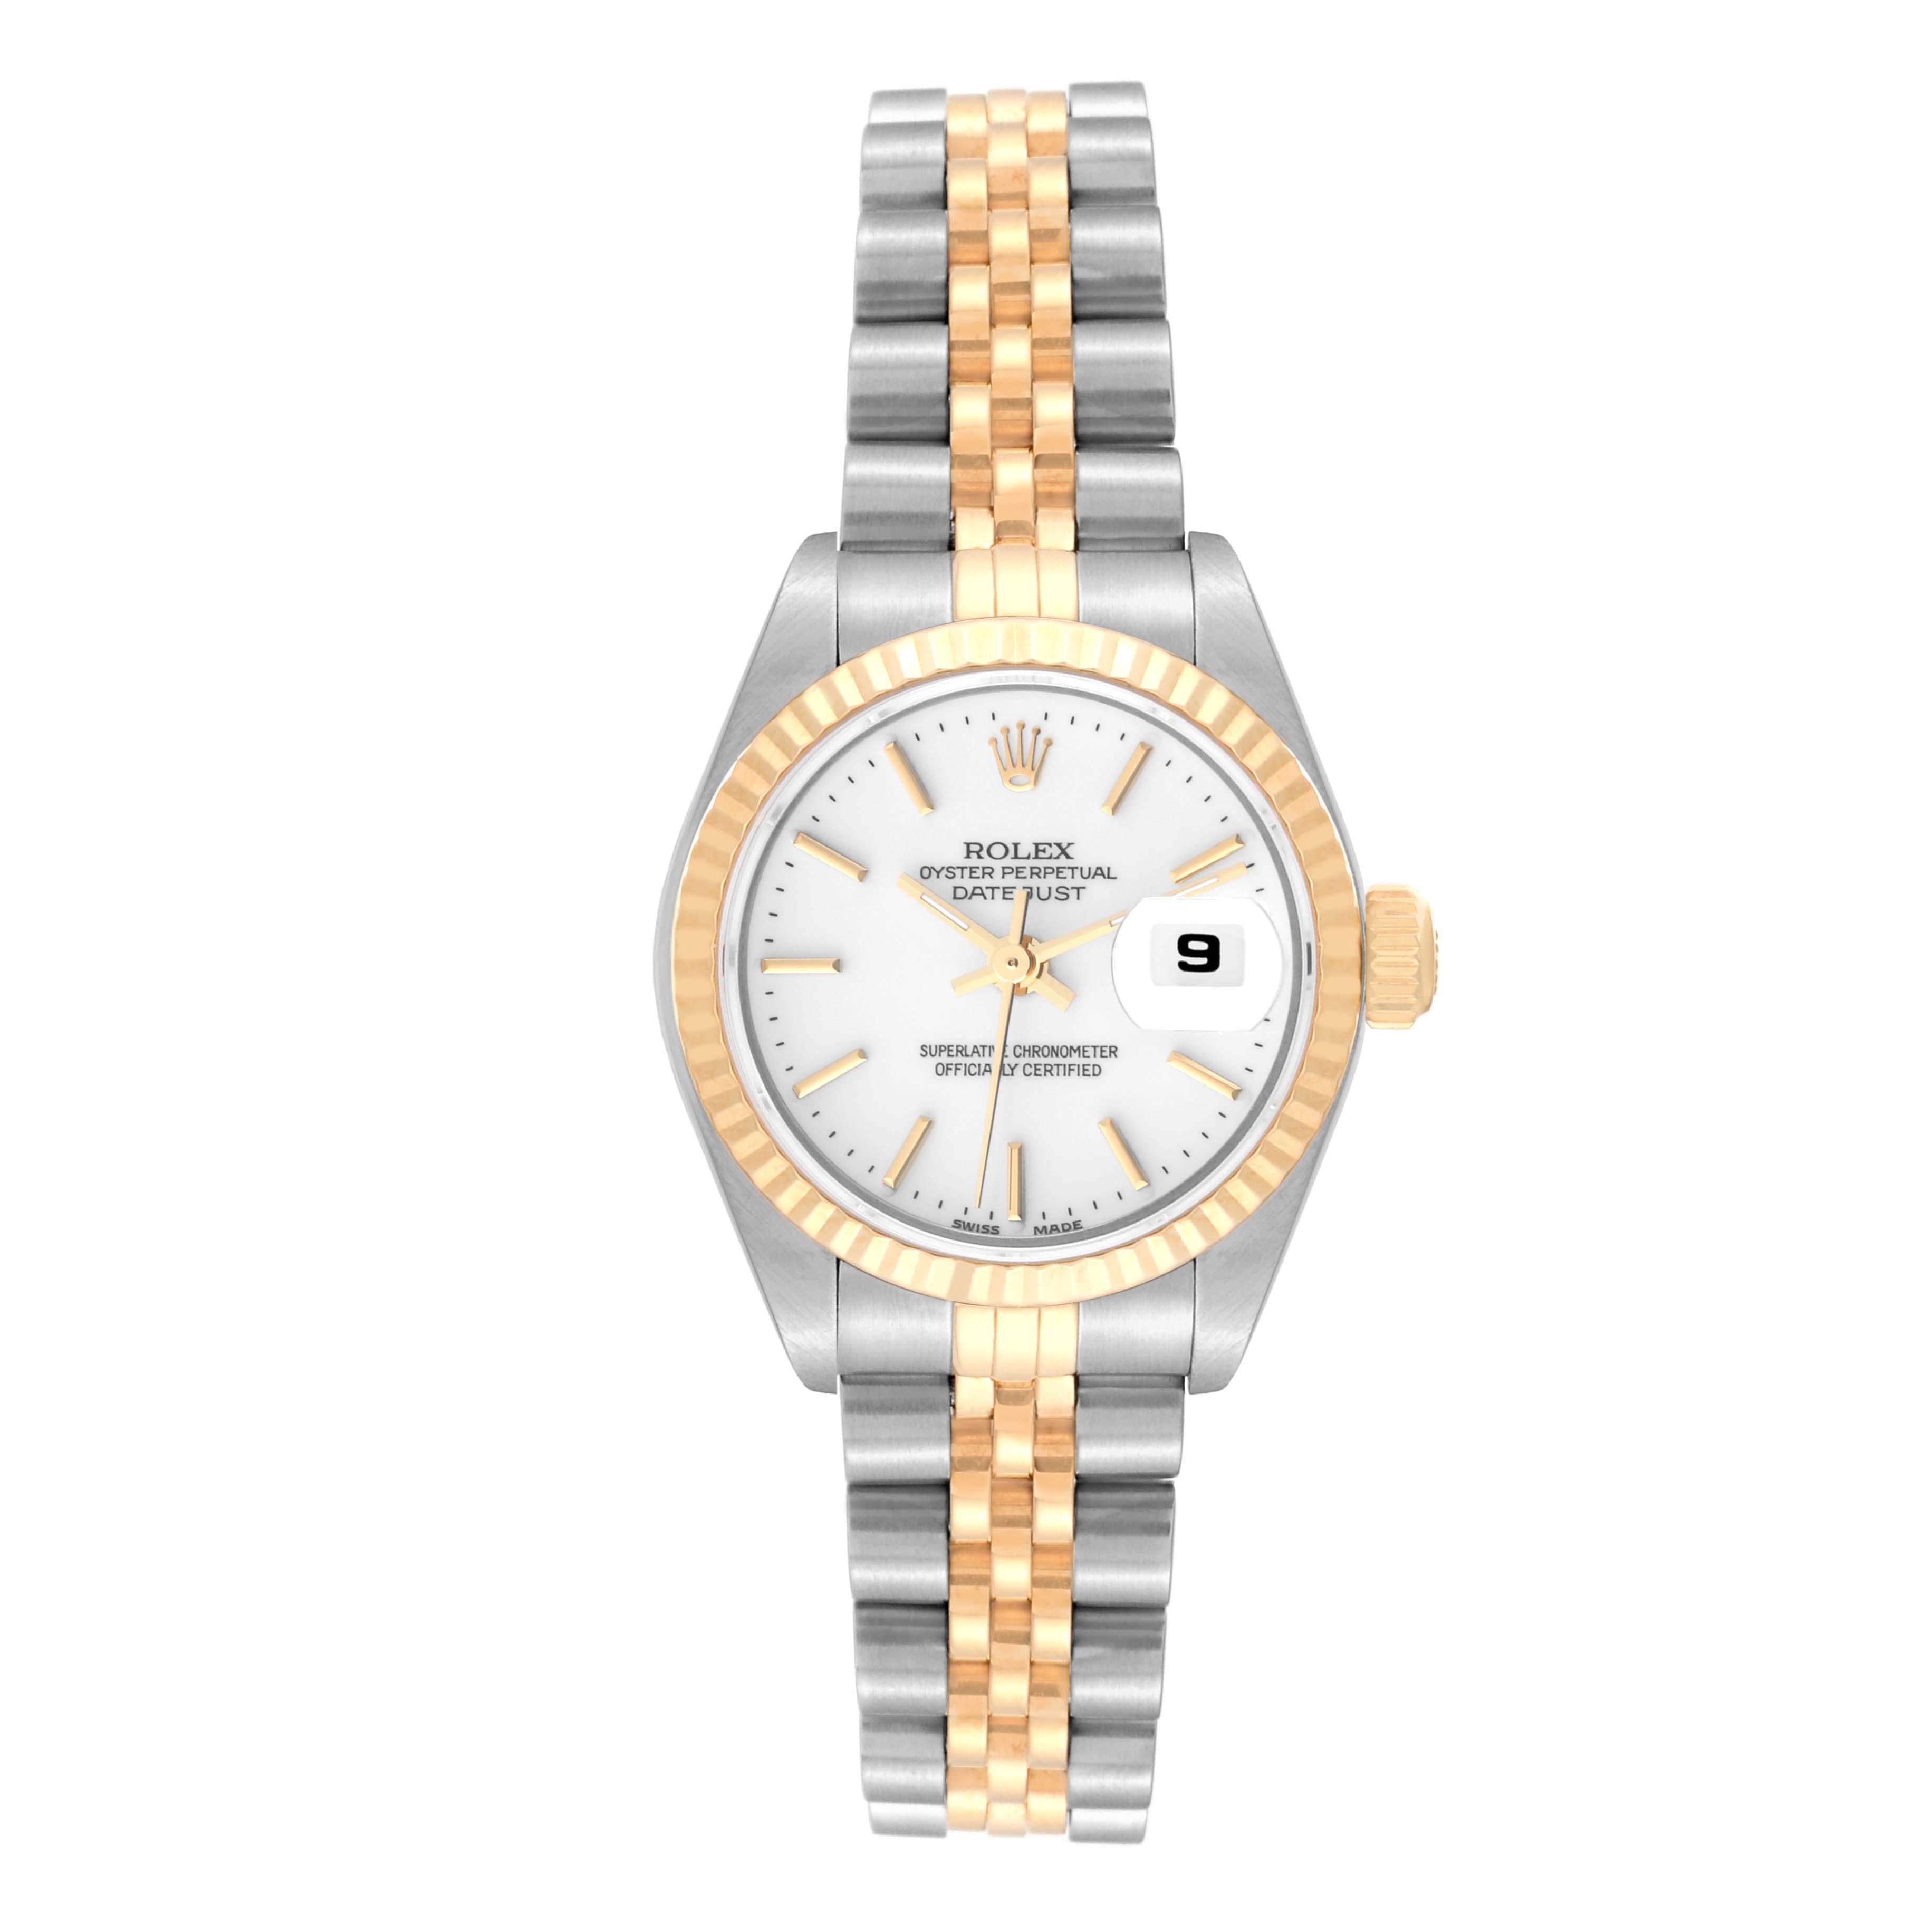 Rolex Datejust Steel Yellow Gold White Dial Ladies Watch 79173 Papers 6